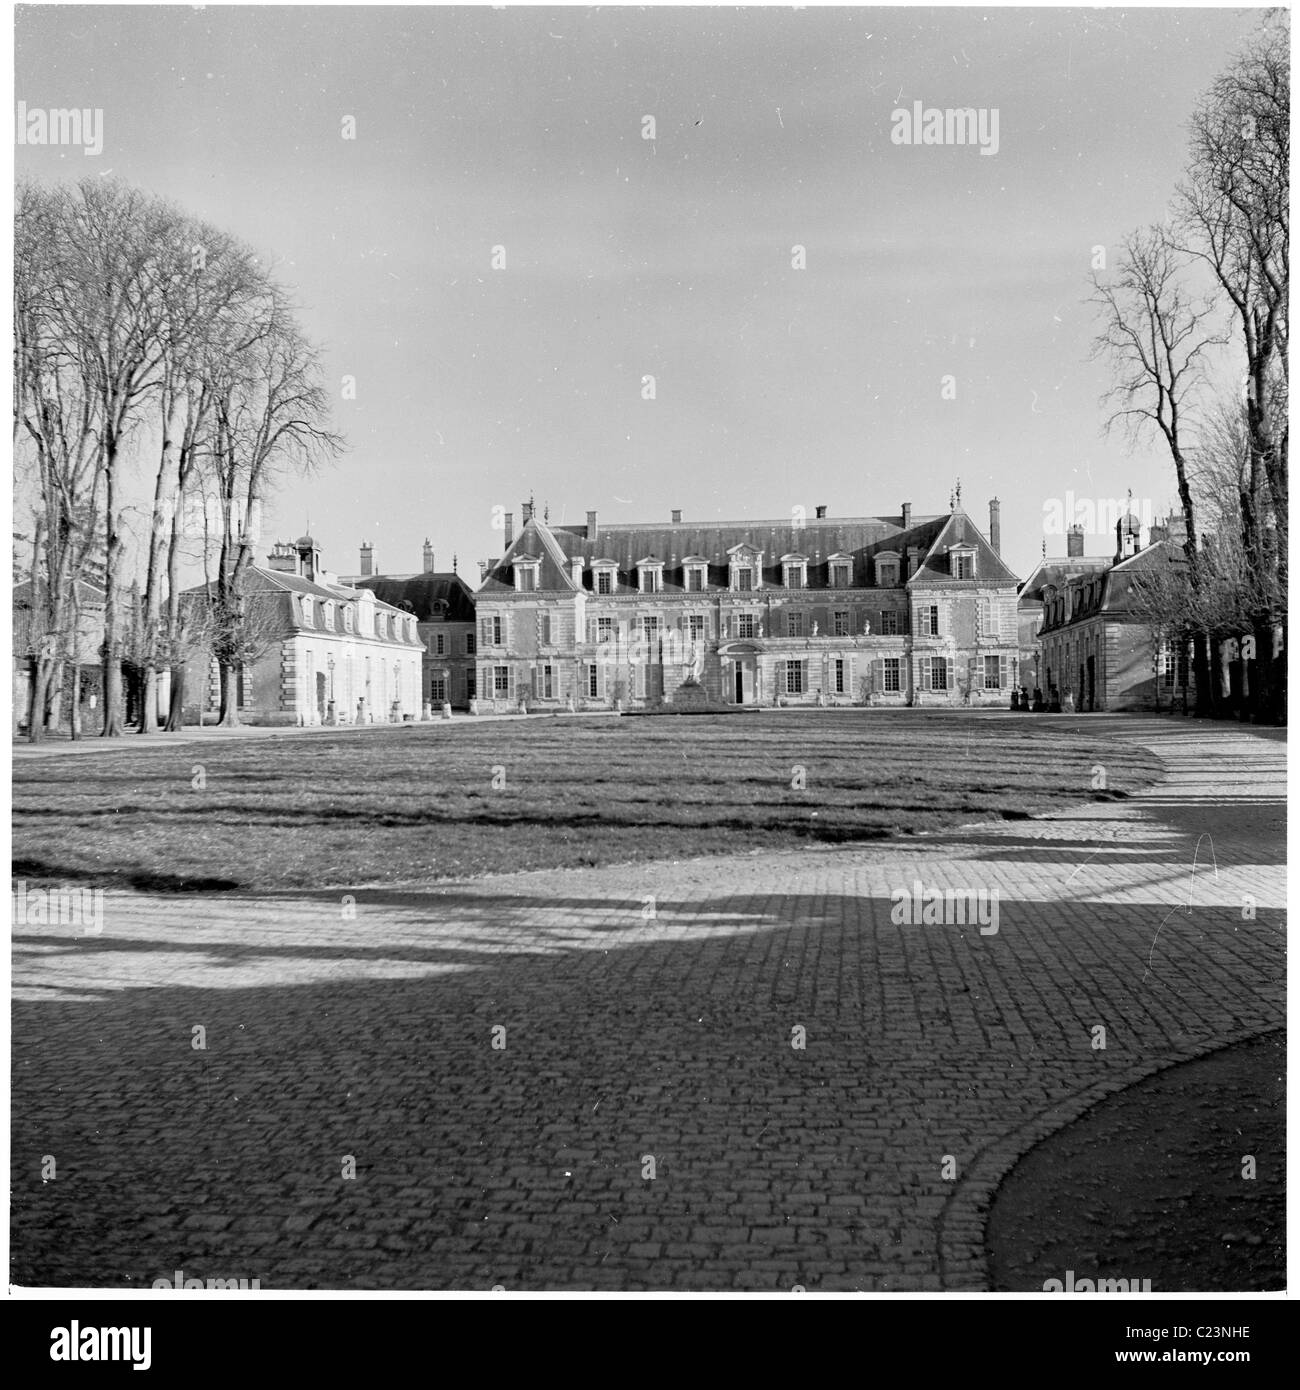 1950s. France. View of the house and grounds of the Chateau de la Marquise de Pompadour at Menars. Stock Photo